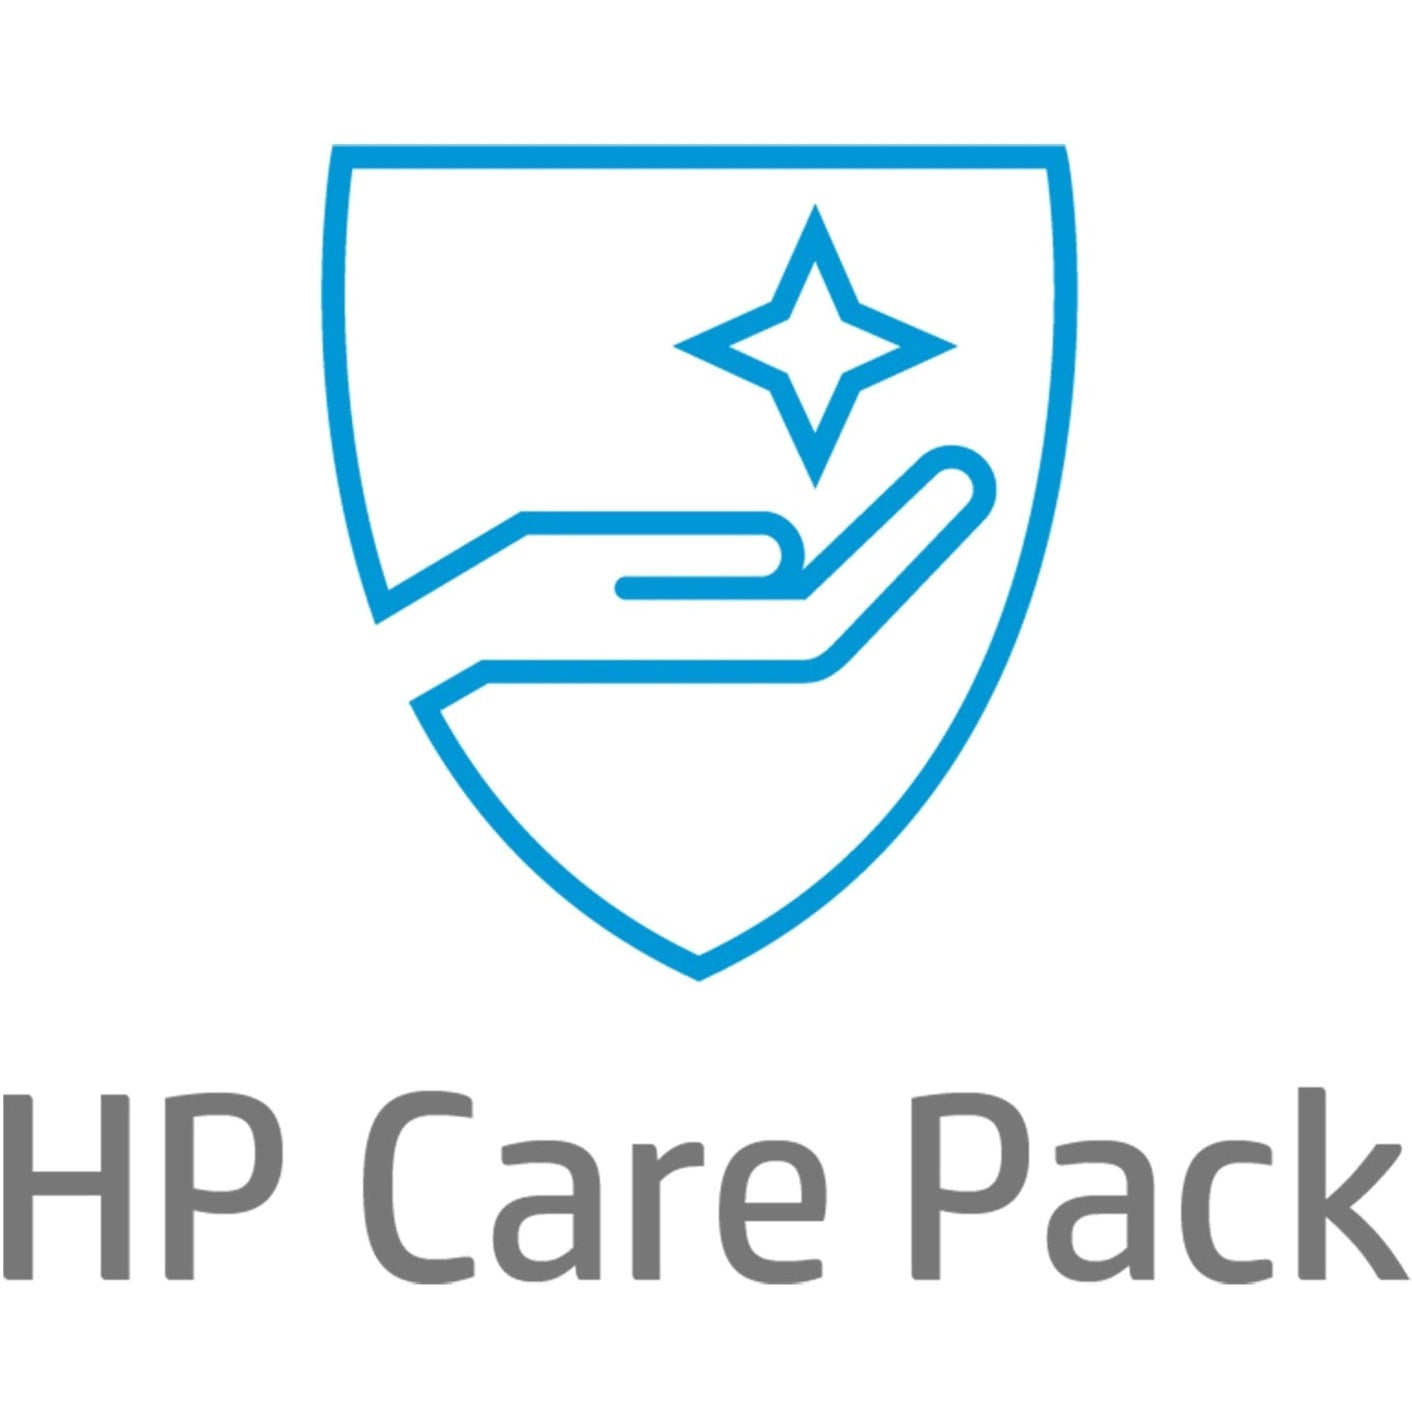 HP Care Pack Hardware Support with Accidental Damage Protection and Defective Media Retention - 3 Year - Service (UL784E)